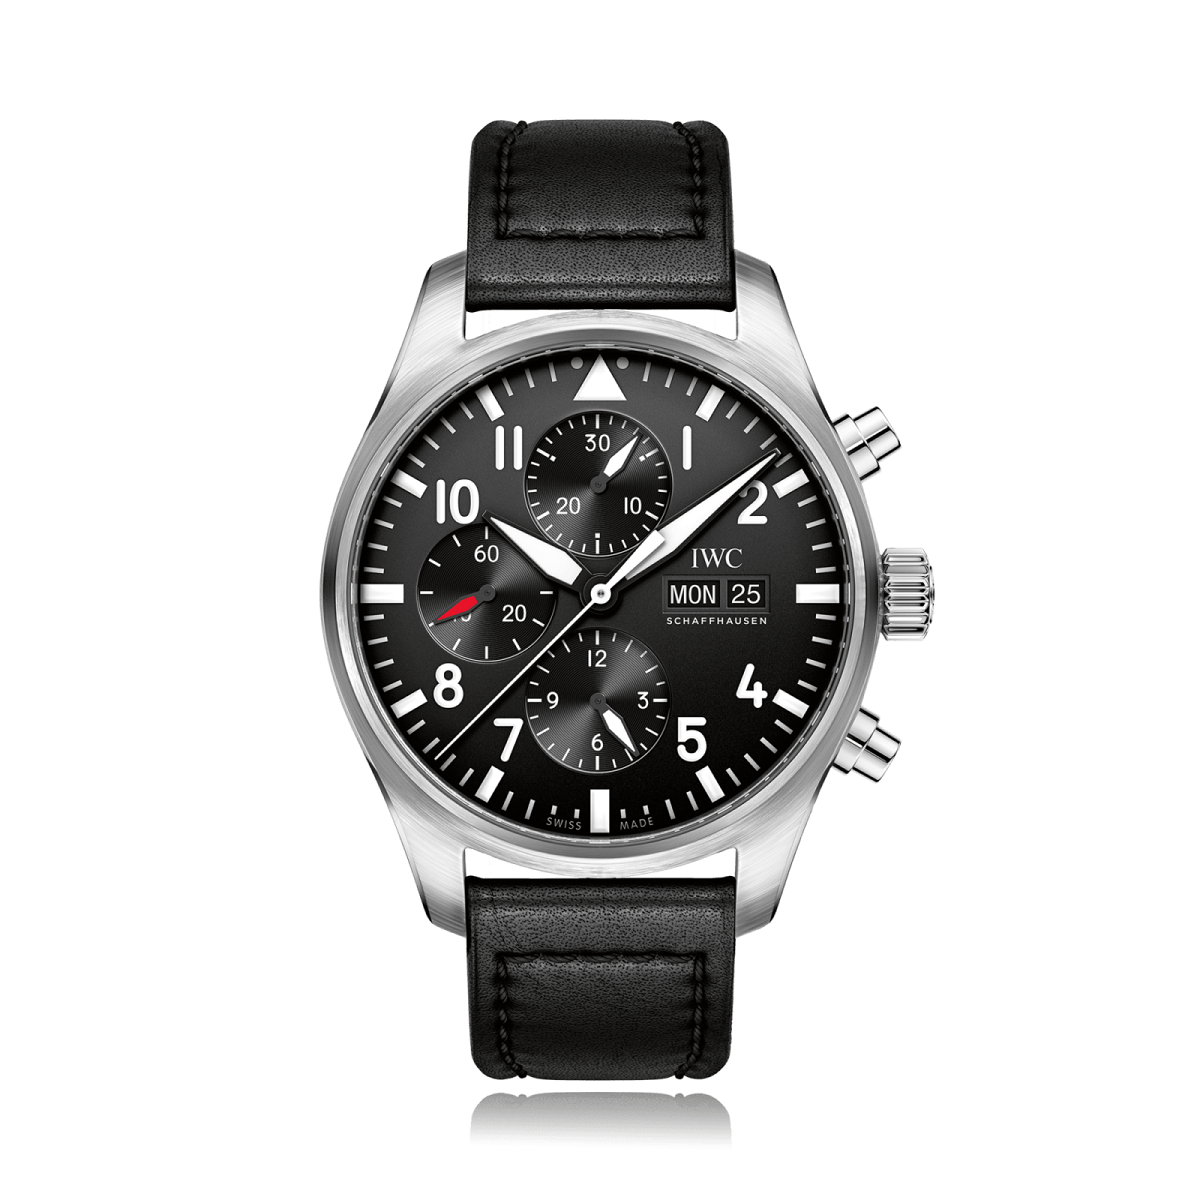 IWC Schaffhausen Pilot Chronograph Automatic Stainless Steel Black Dial Mens Watch IW377709